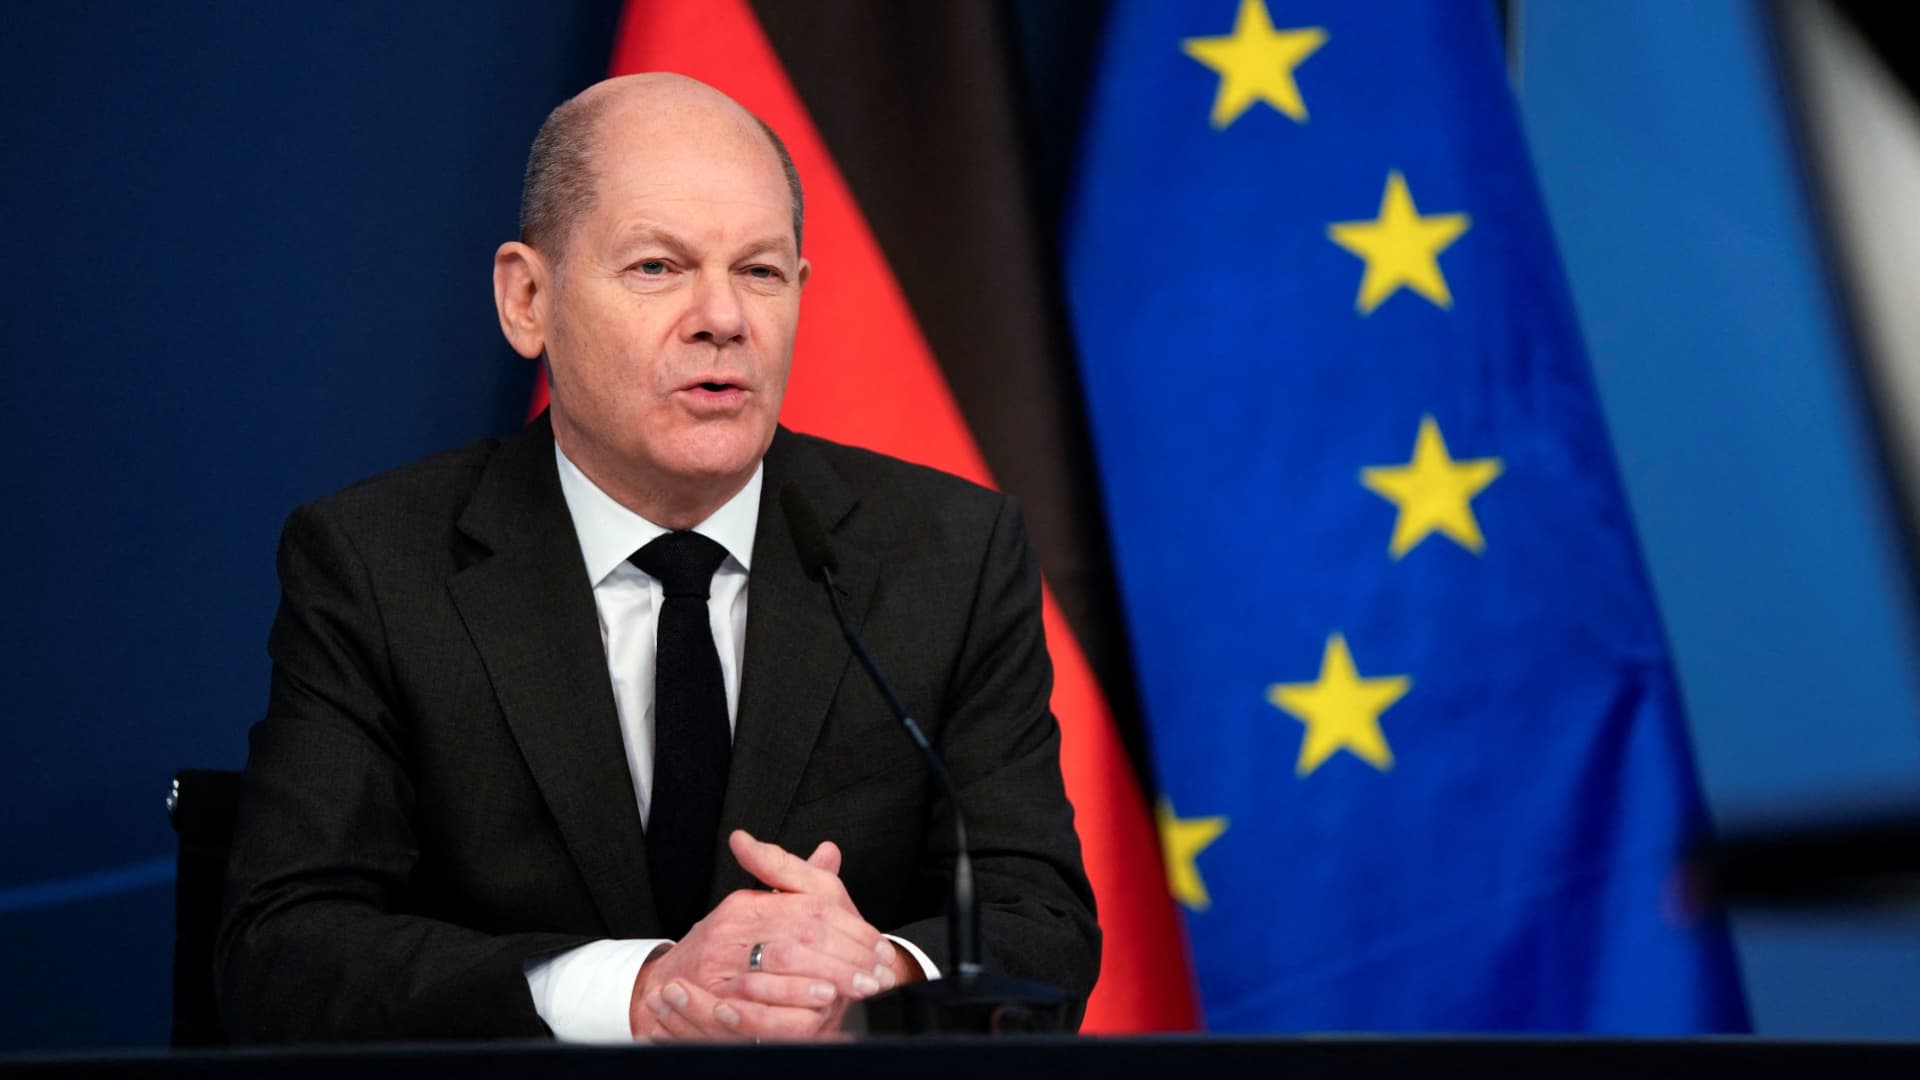 German Chancellor Olaf Scholz sits in front of a camera as he delivers his speech for the Davos Agenda 2022, at the Chancellery in Berlin, Germany January 19, 2022.